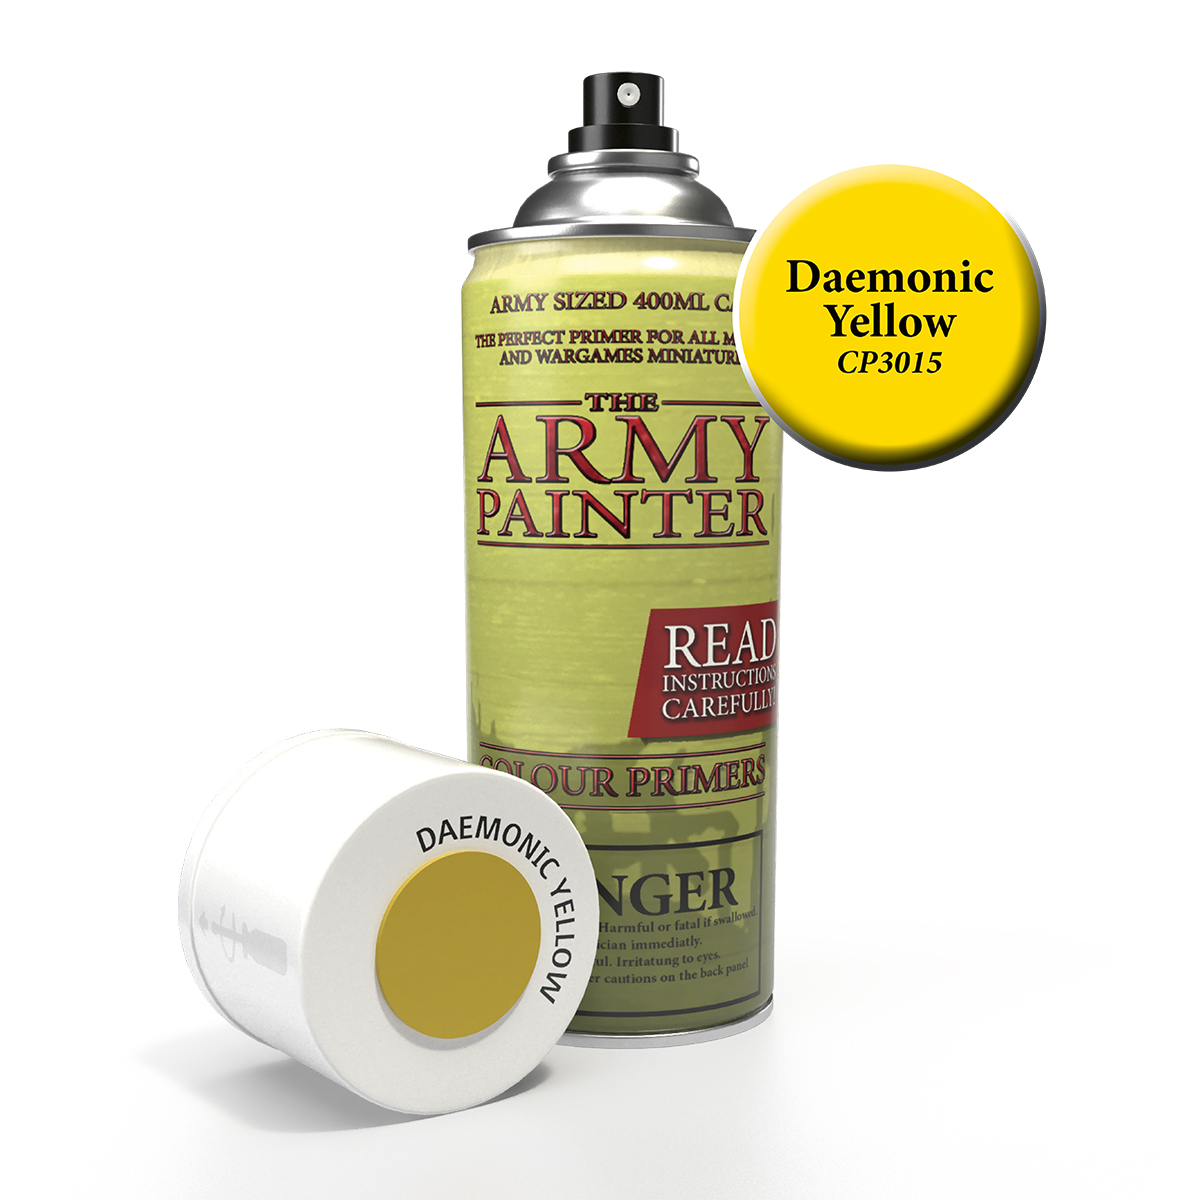 ArmyPainter Colorspray Daemonic Yellow